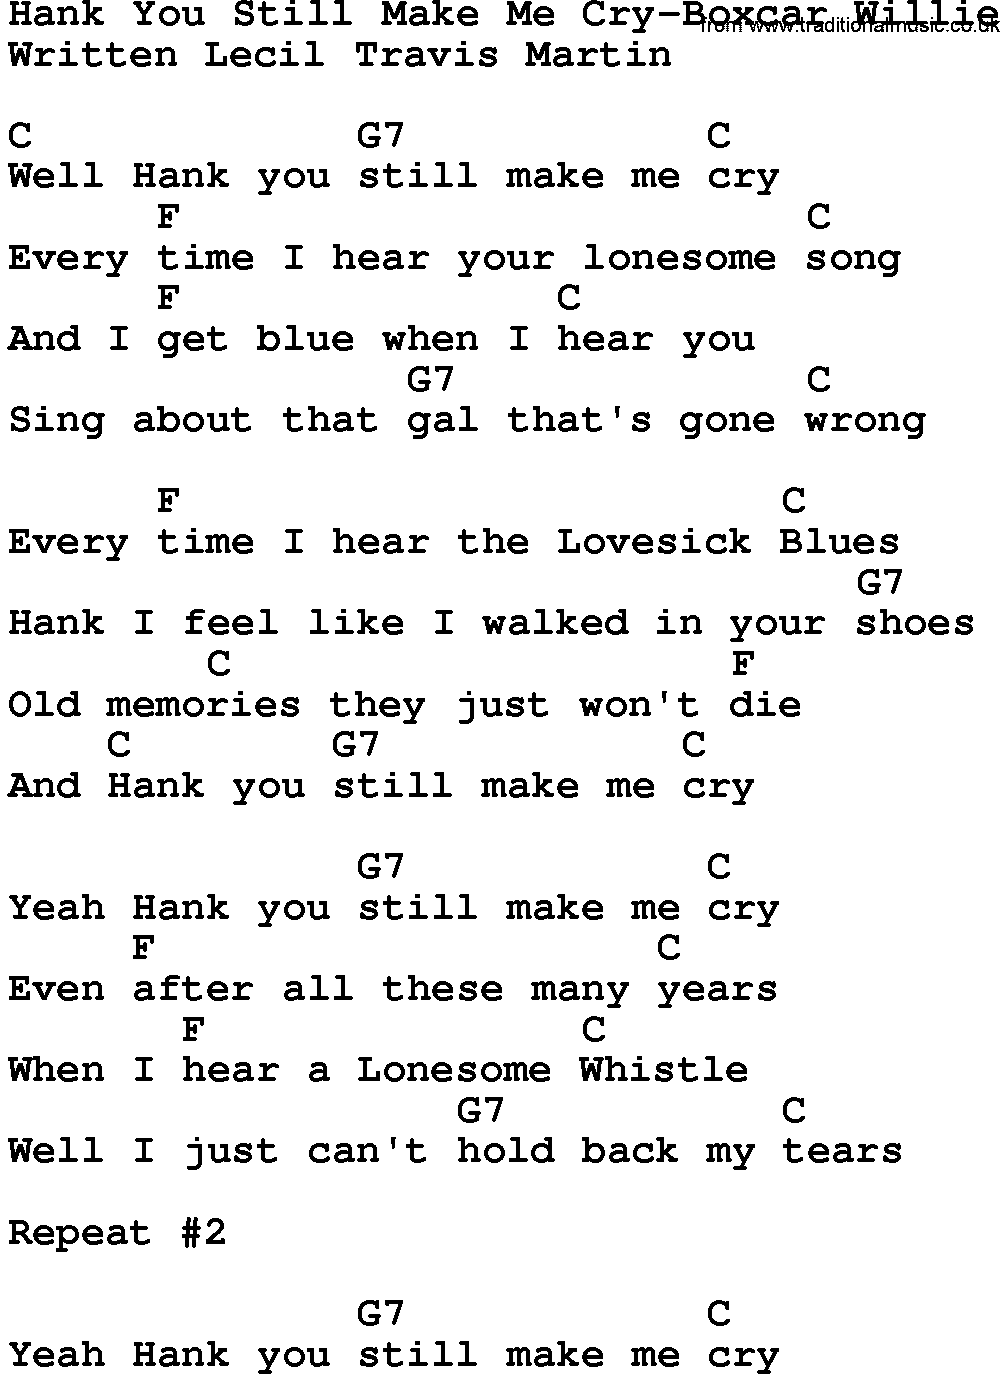 Country music song: Hank You Still Make Me Cry-Boxcar Willie lyrics and chords